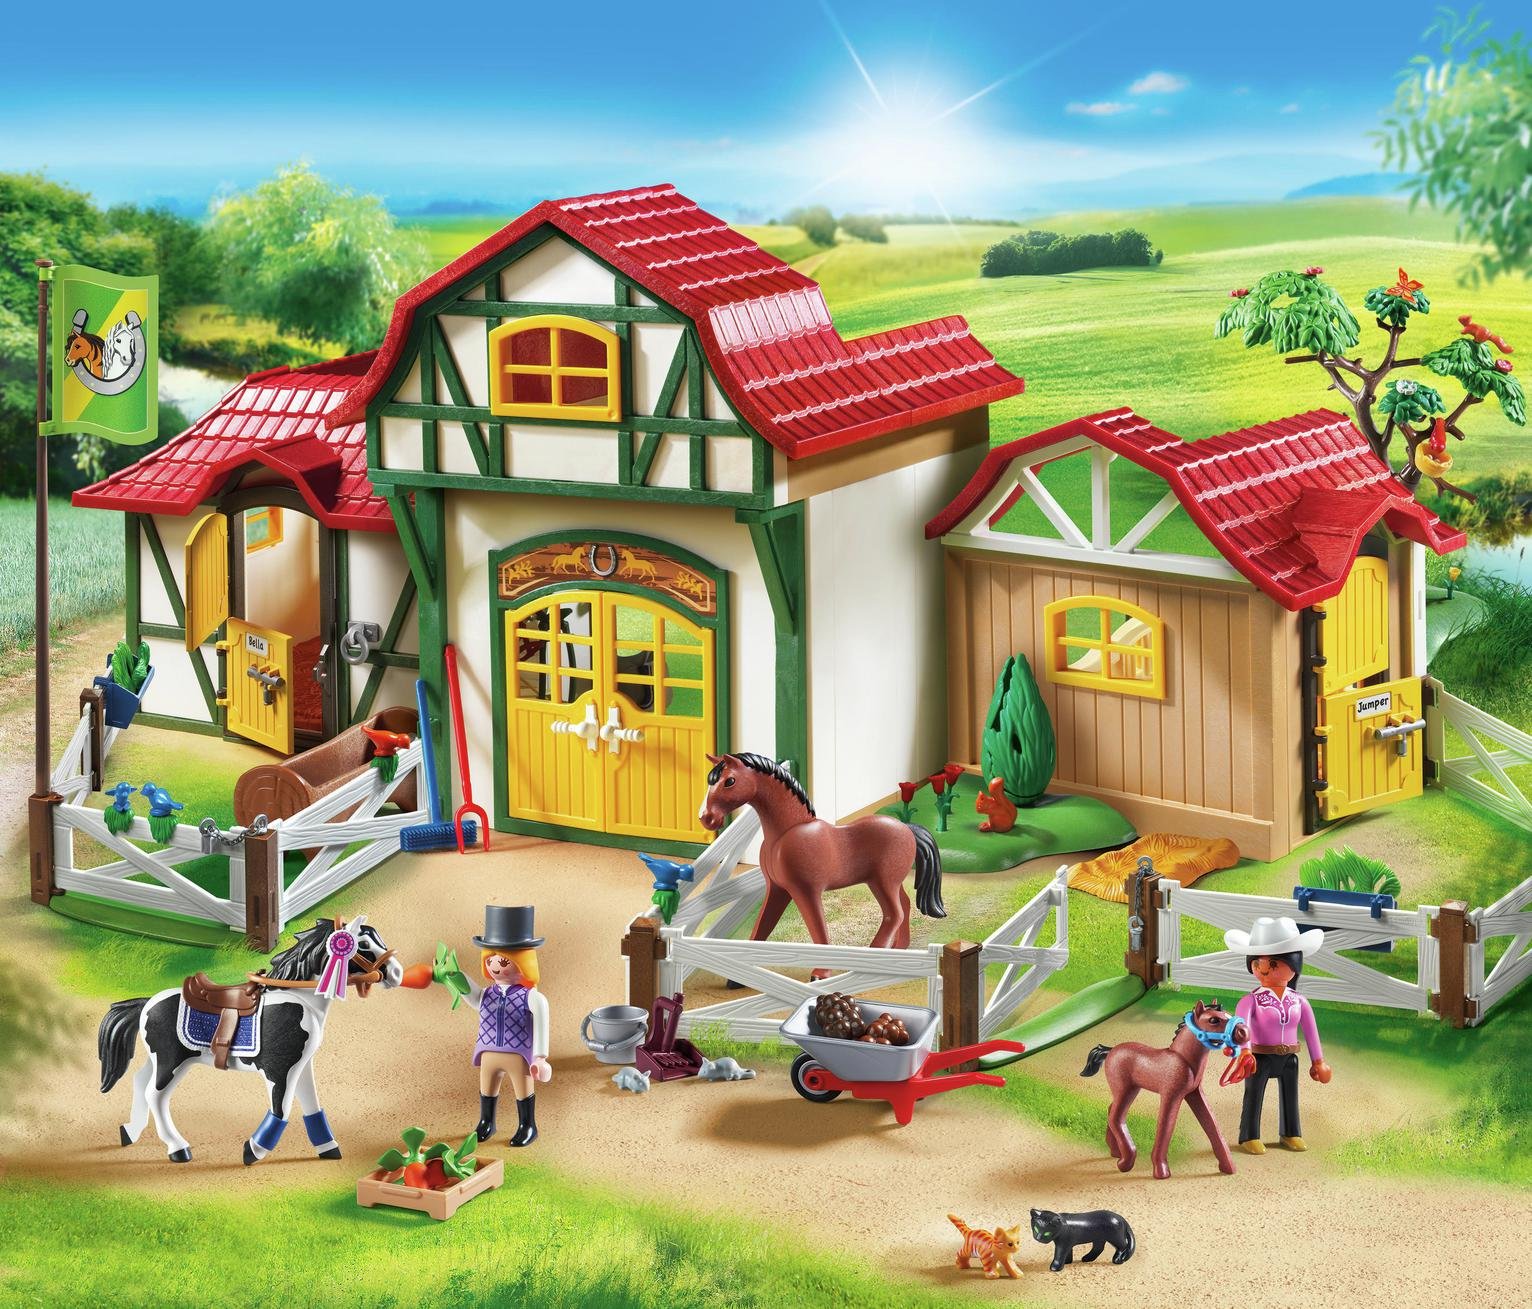 Playmobil 6926 Country Large Horse Farm Review